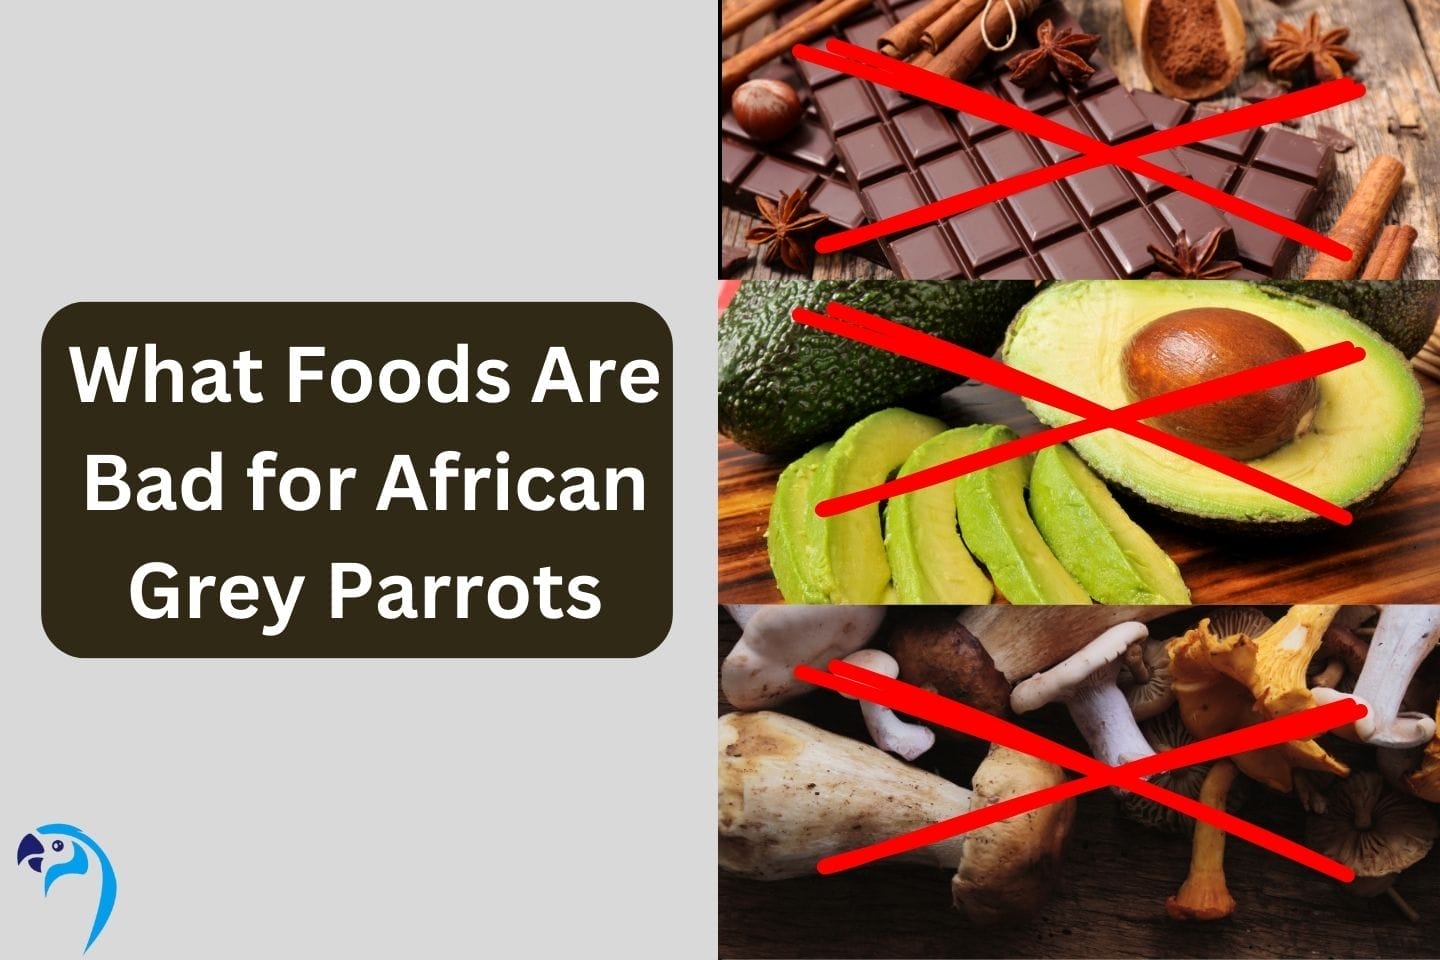 What Foods Are Bad for African Grey Parrots